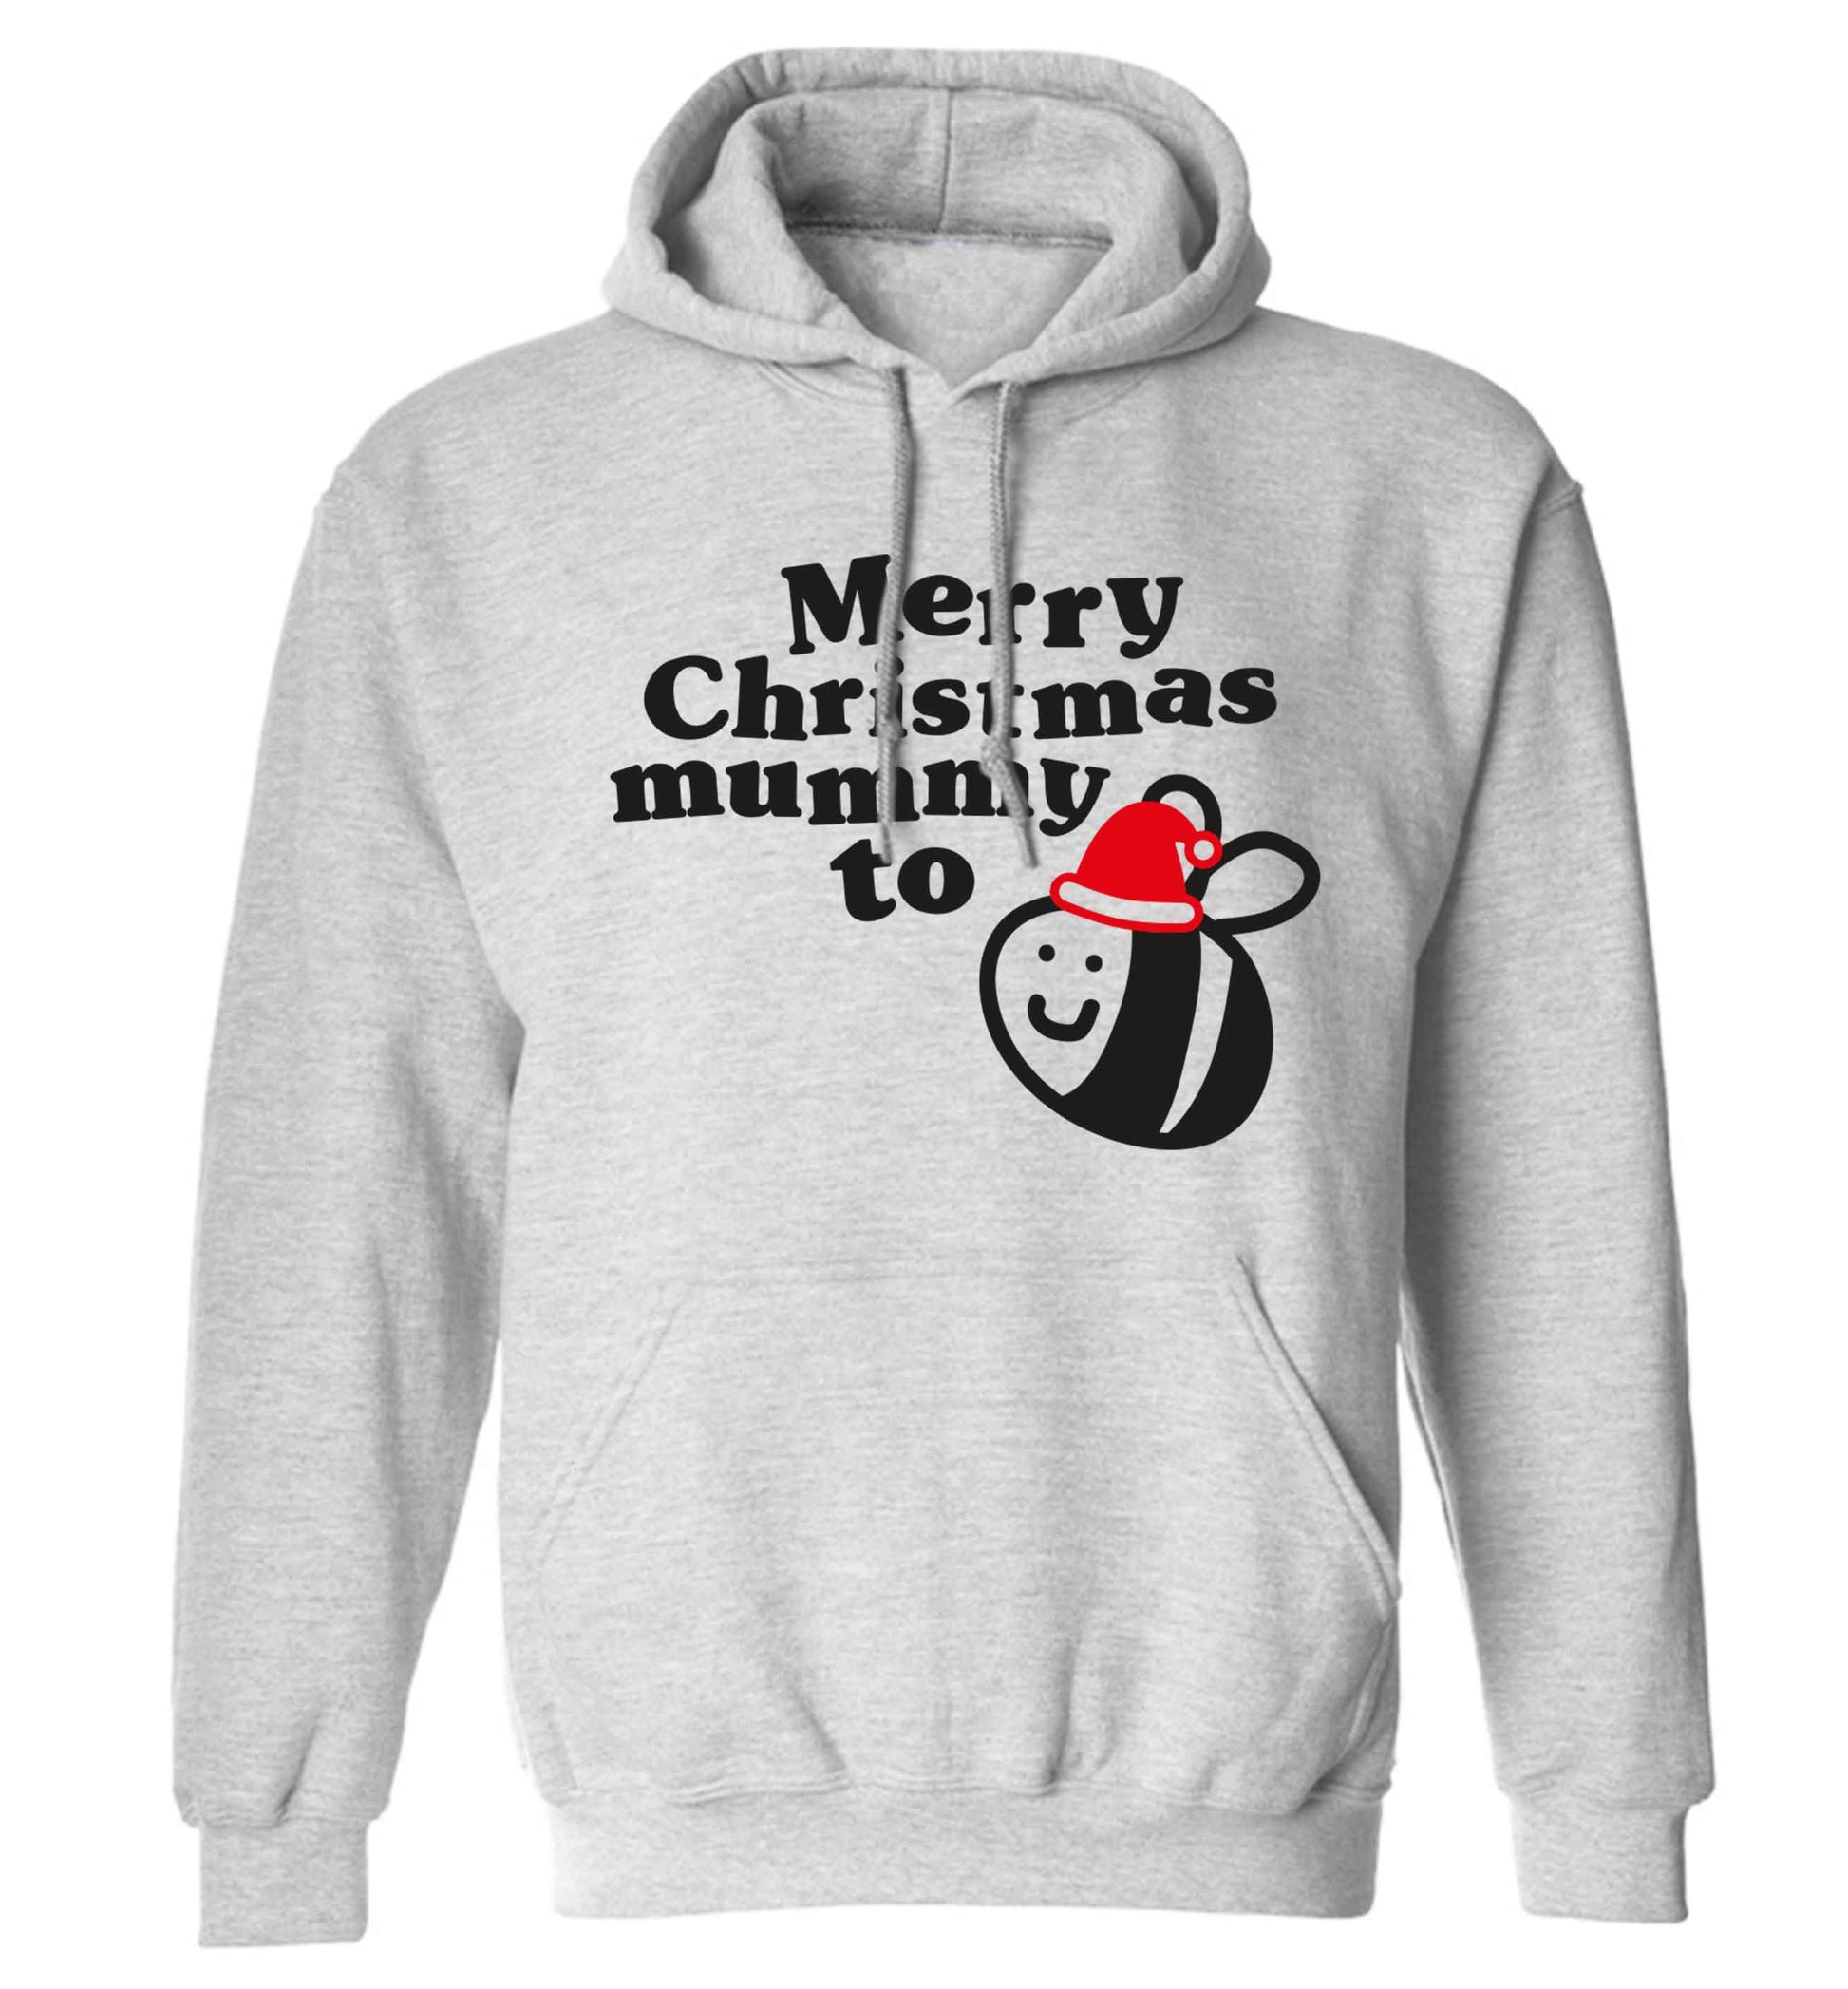 Merry Christmas mummy to be adults unisex grey hoodie 2XL